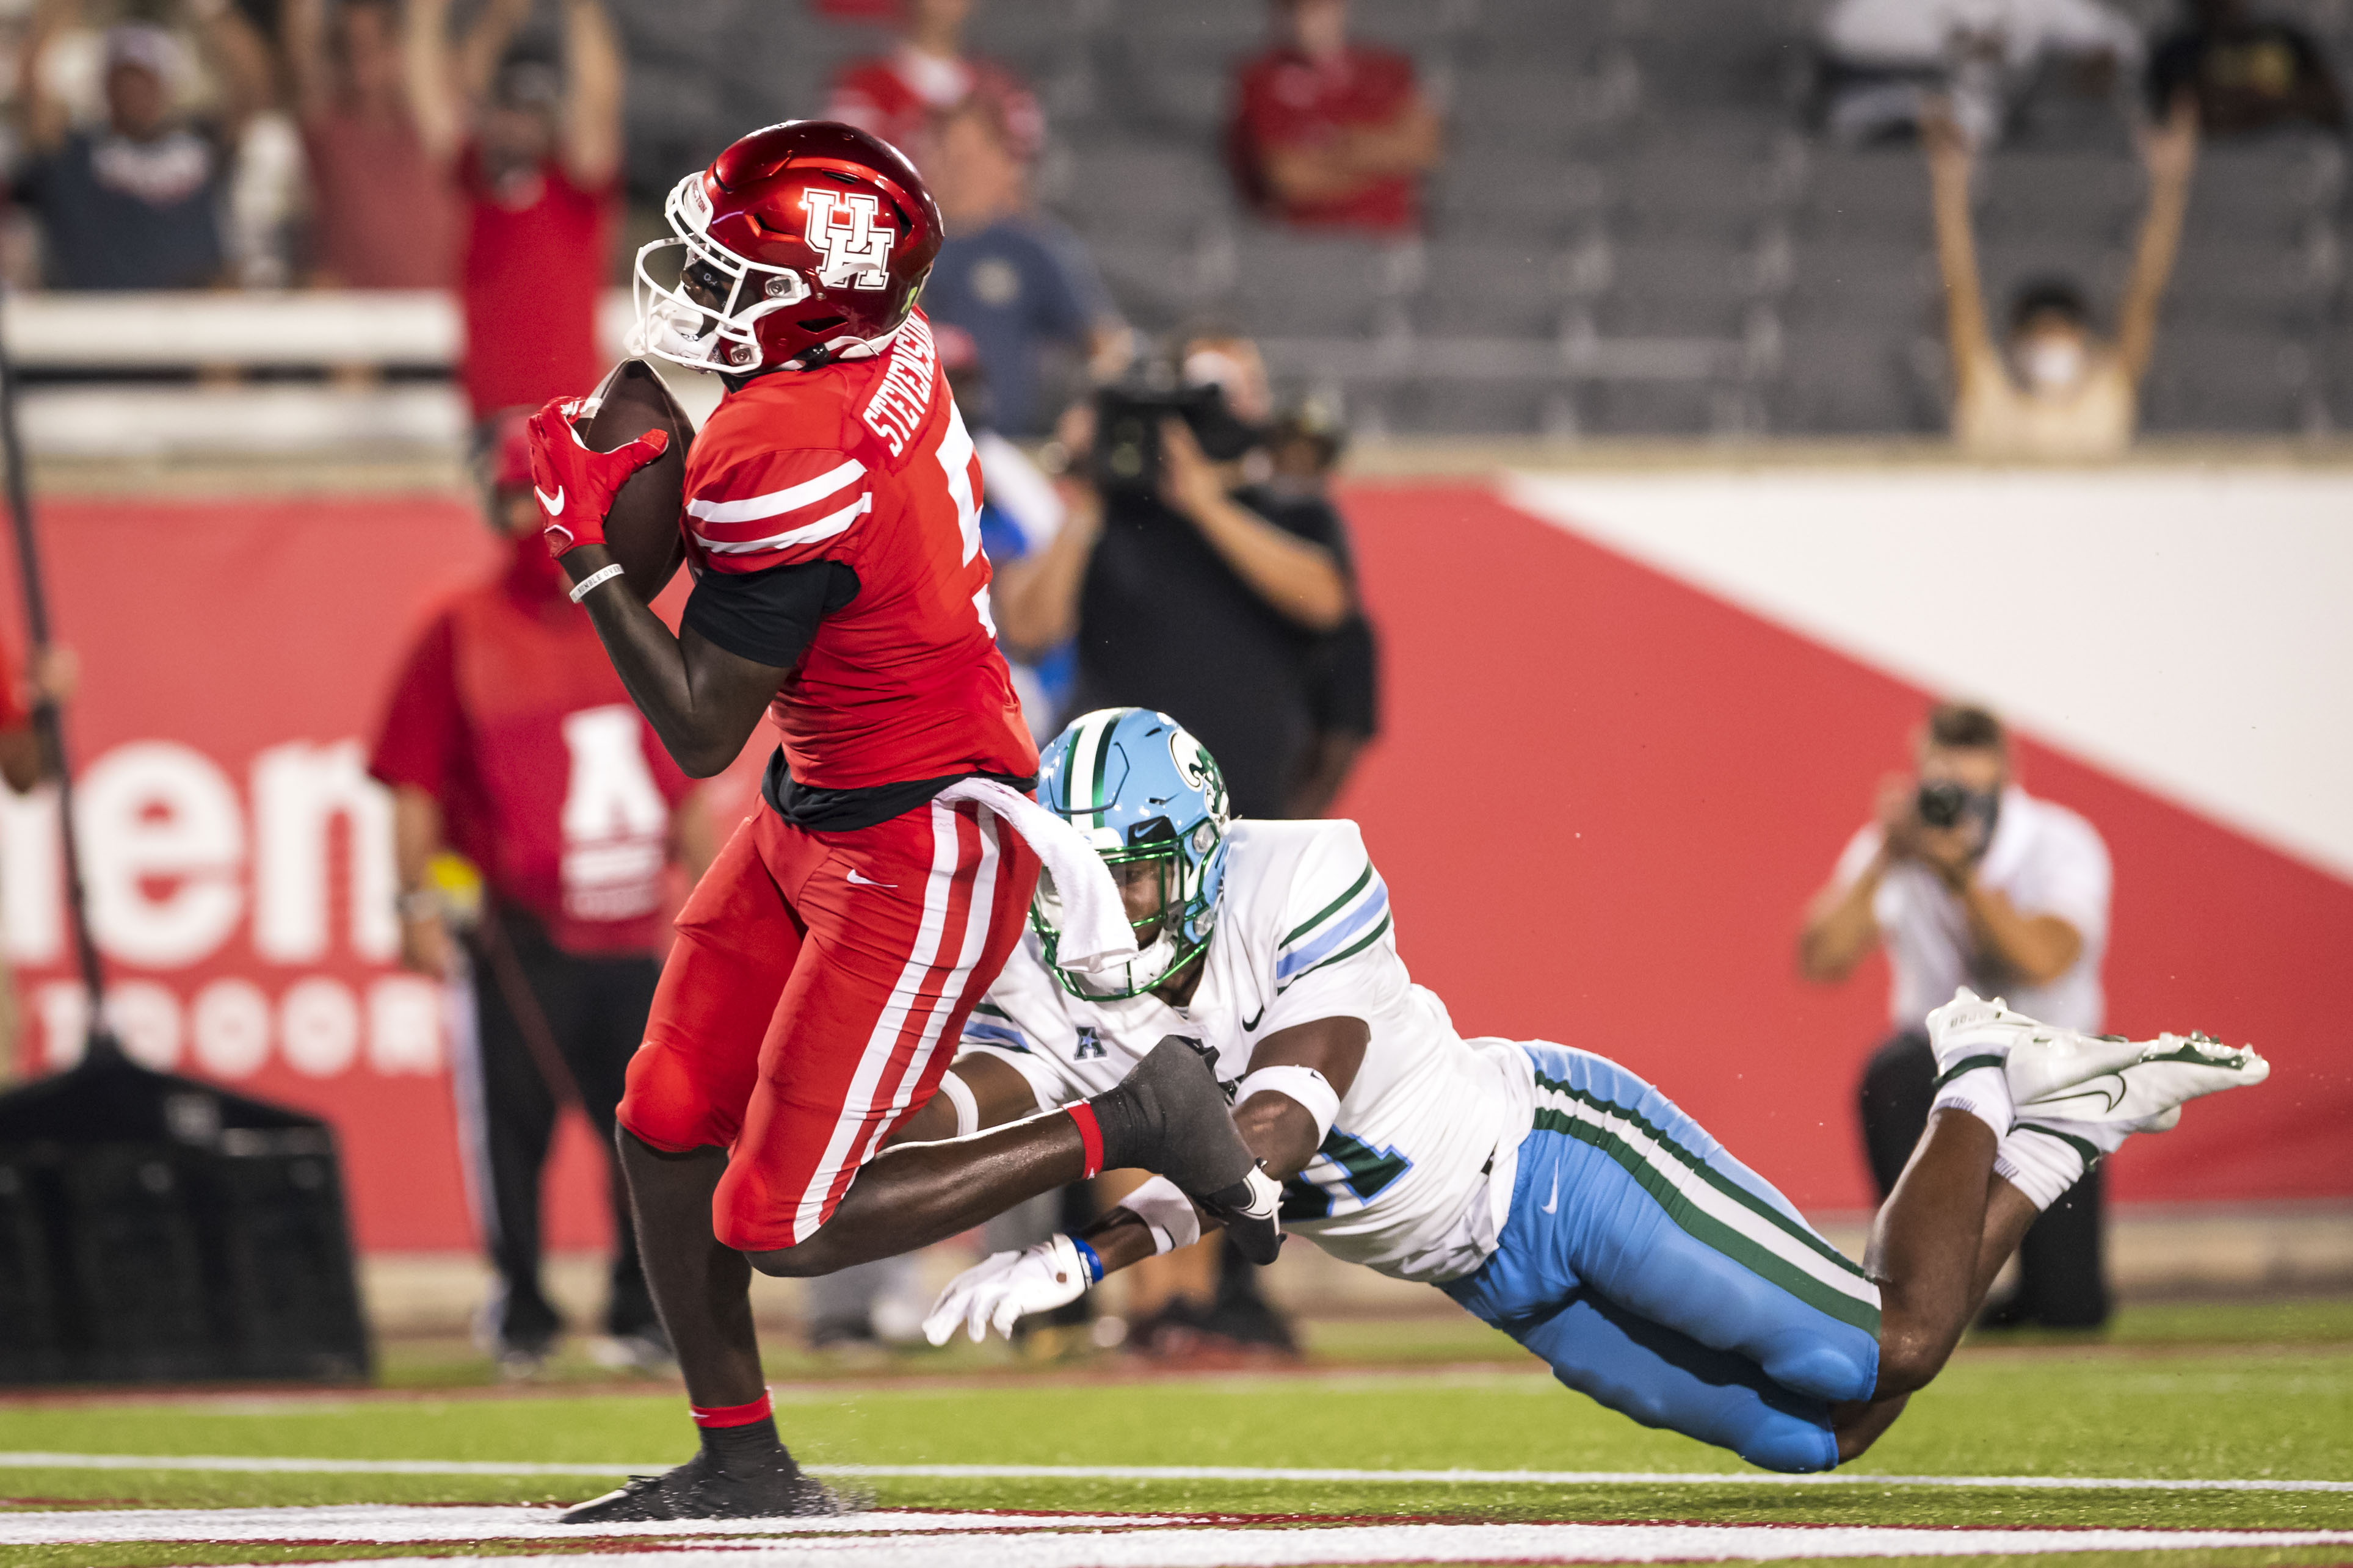 Former UH wide receiver Marquez Stevenson is the newest member of the Buffalo Bills after being selected in the sixth round of the 2021 NFL Draft | Courtesy of UH athletics